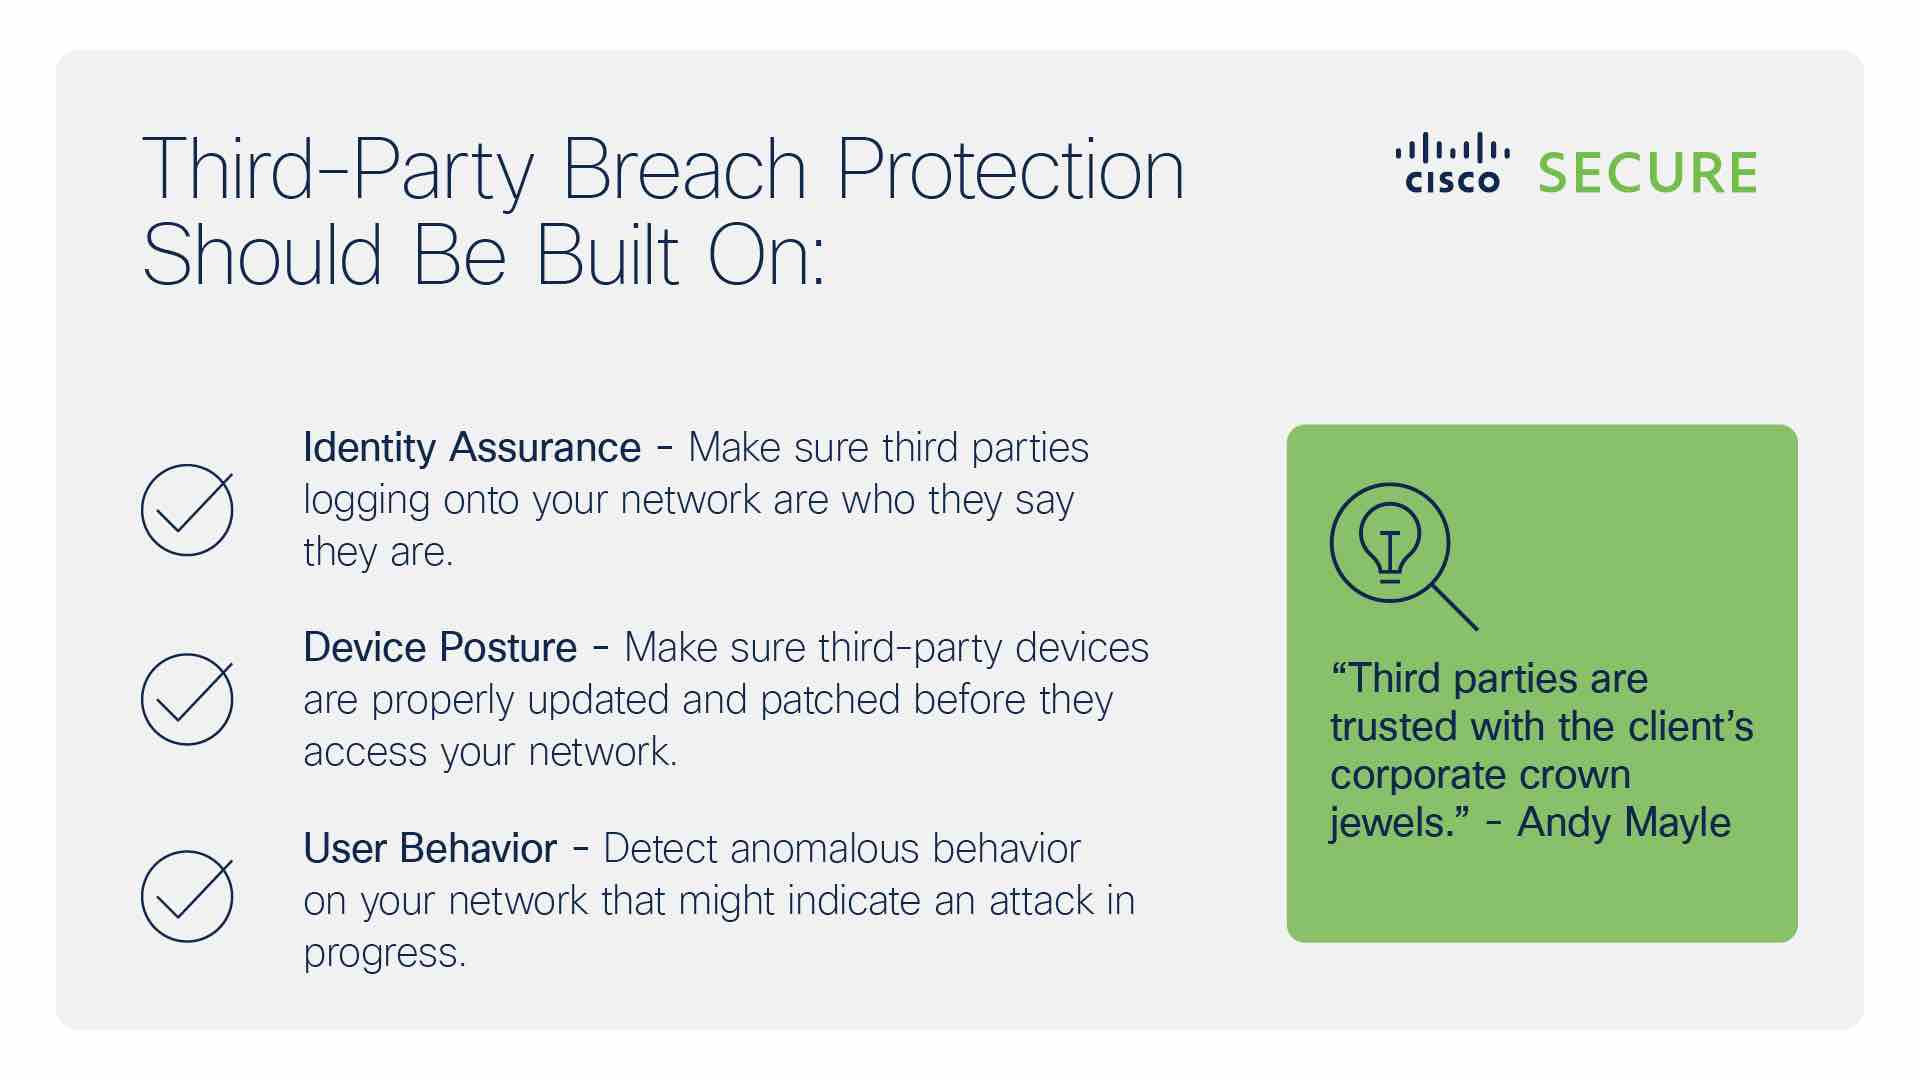 Infographic about what third-party breach protection should be built on. These things are: 1. Identity assurance - make sure third parties logging onto your network are who they say they are. 2) Device posture - Make sure third-party devices are properly updated and patched before they access your network. 3) User behavior - detect anomalous behavior on your network that might indicate an attack in progress. A quote from Andy Mayle reads: 